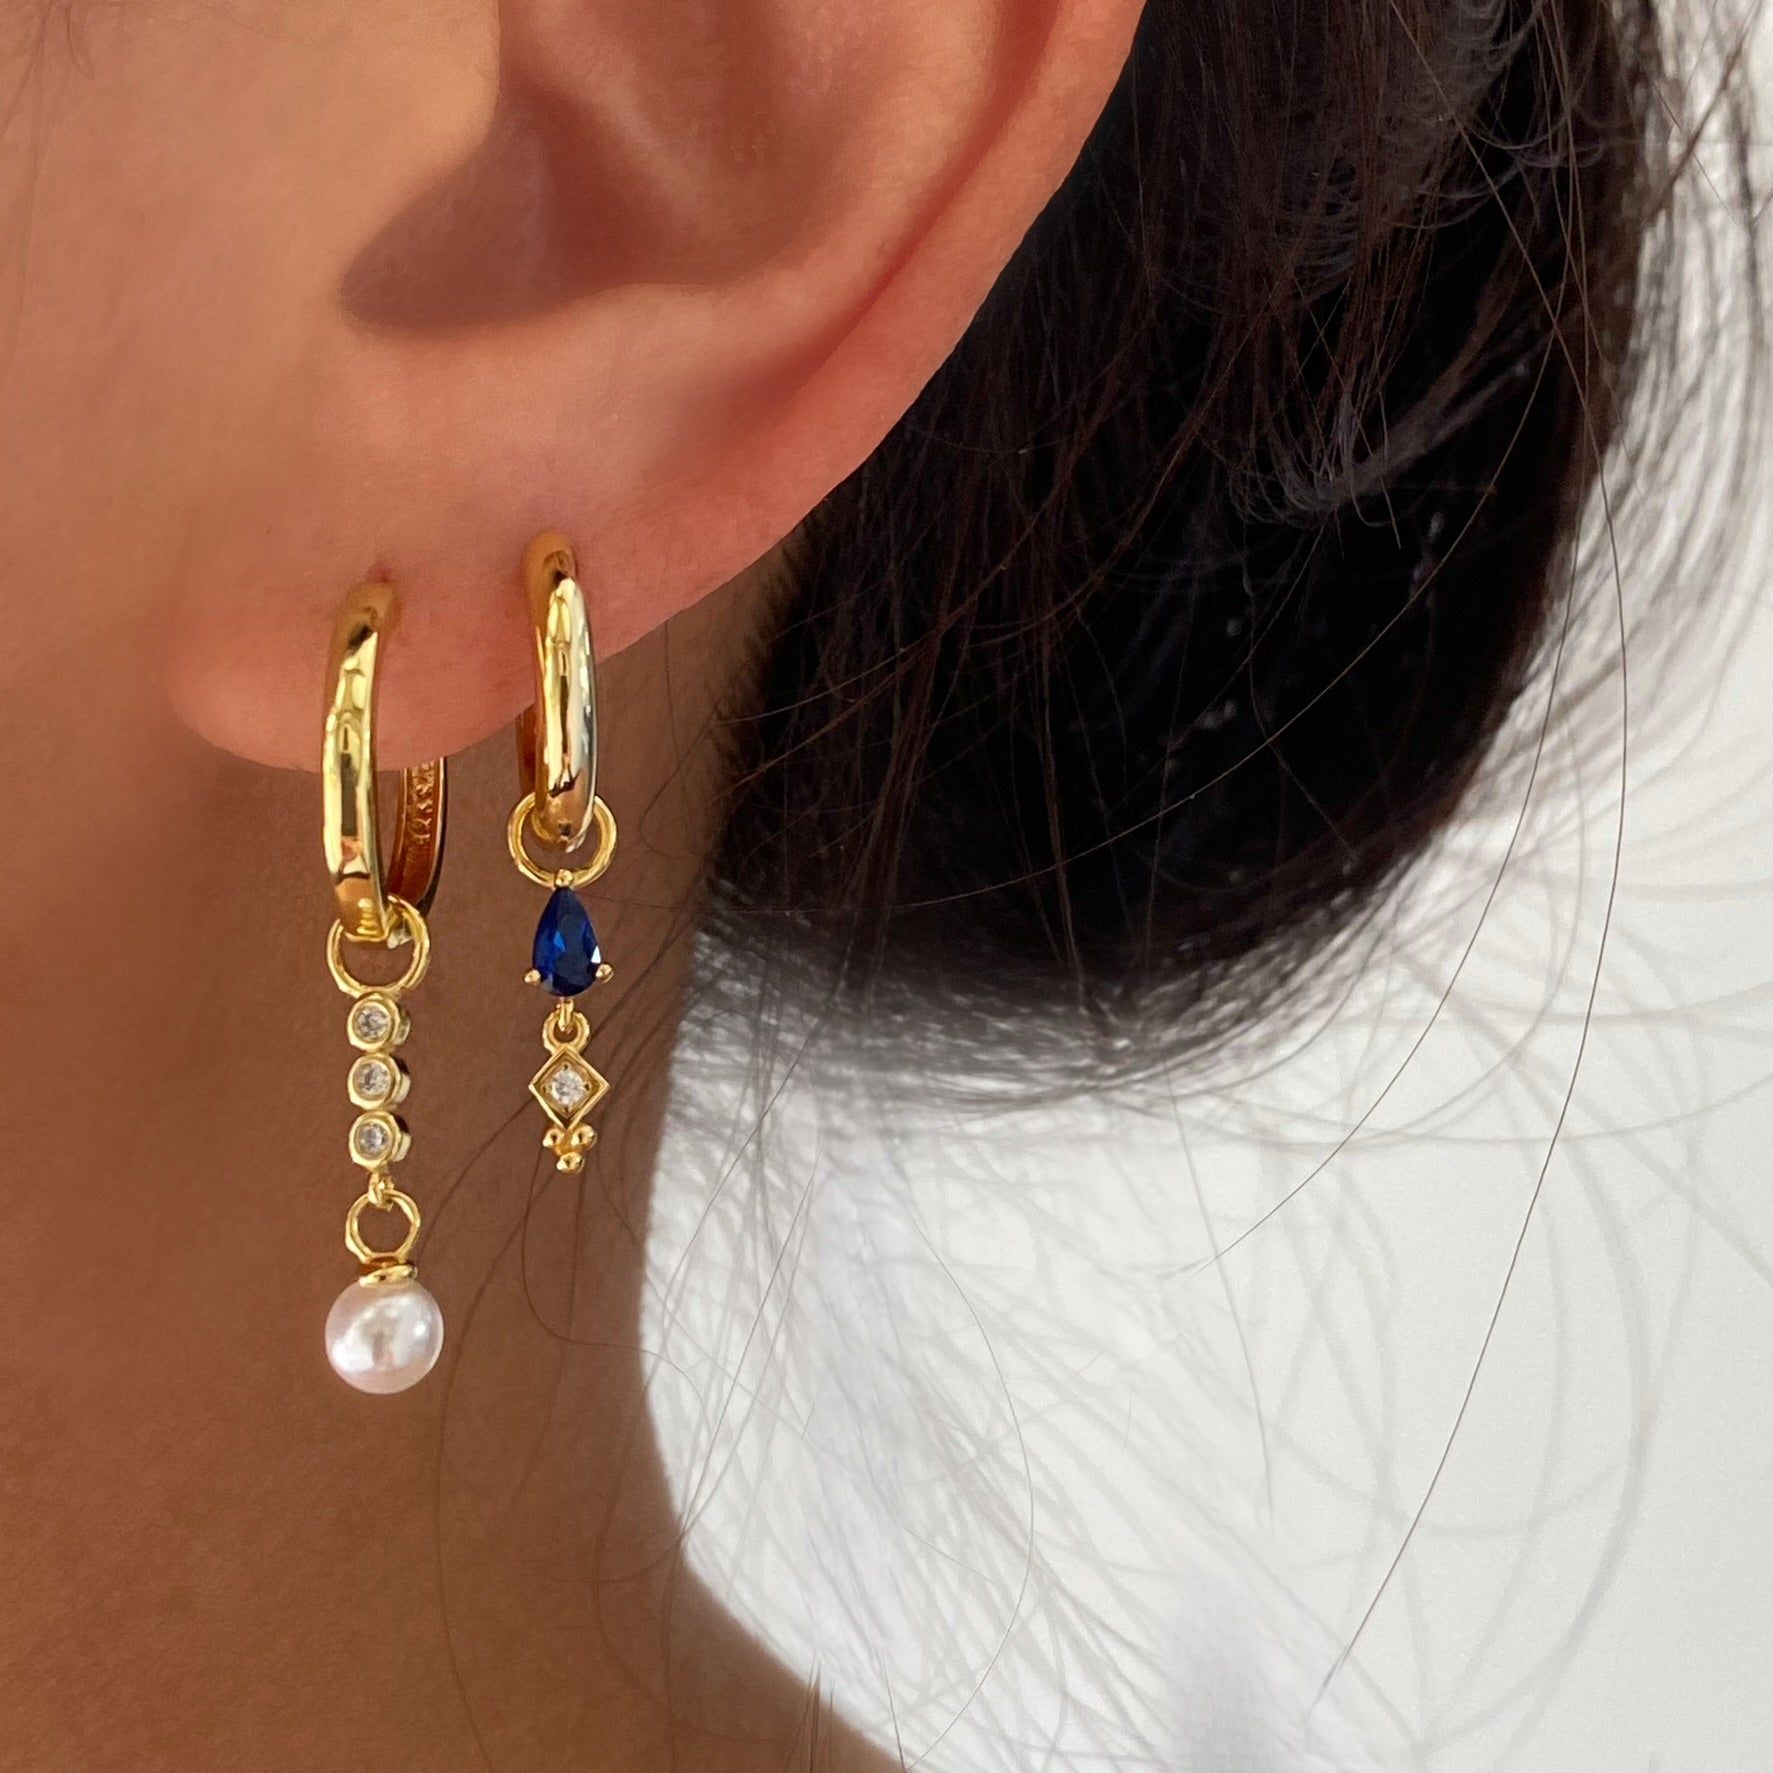 Fascinating gold dangle earrings for special occasions